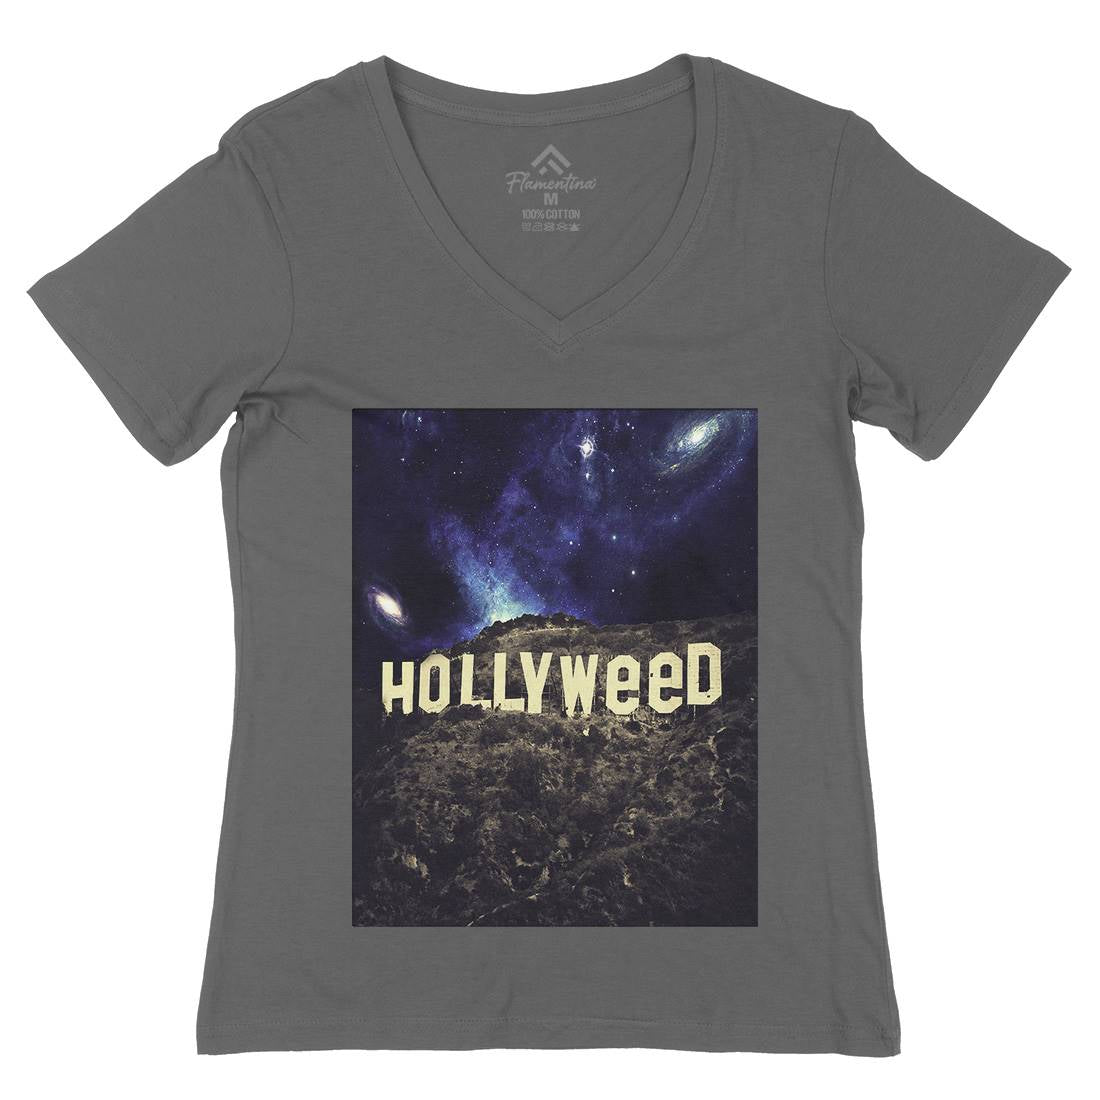 Hollyweed Womens Organic V-Neck T-Shirt Space A847